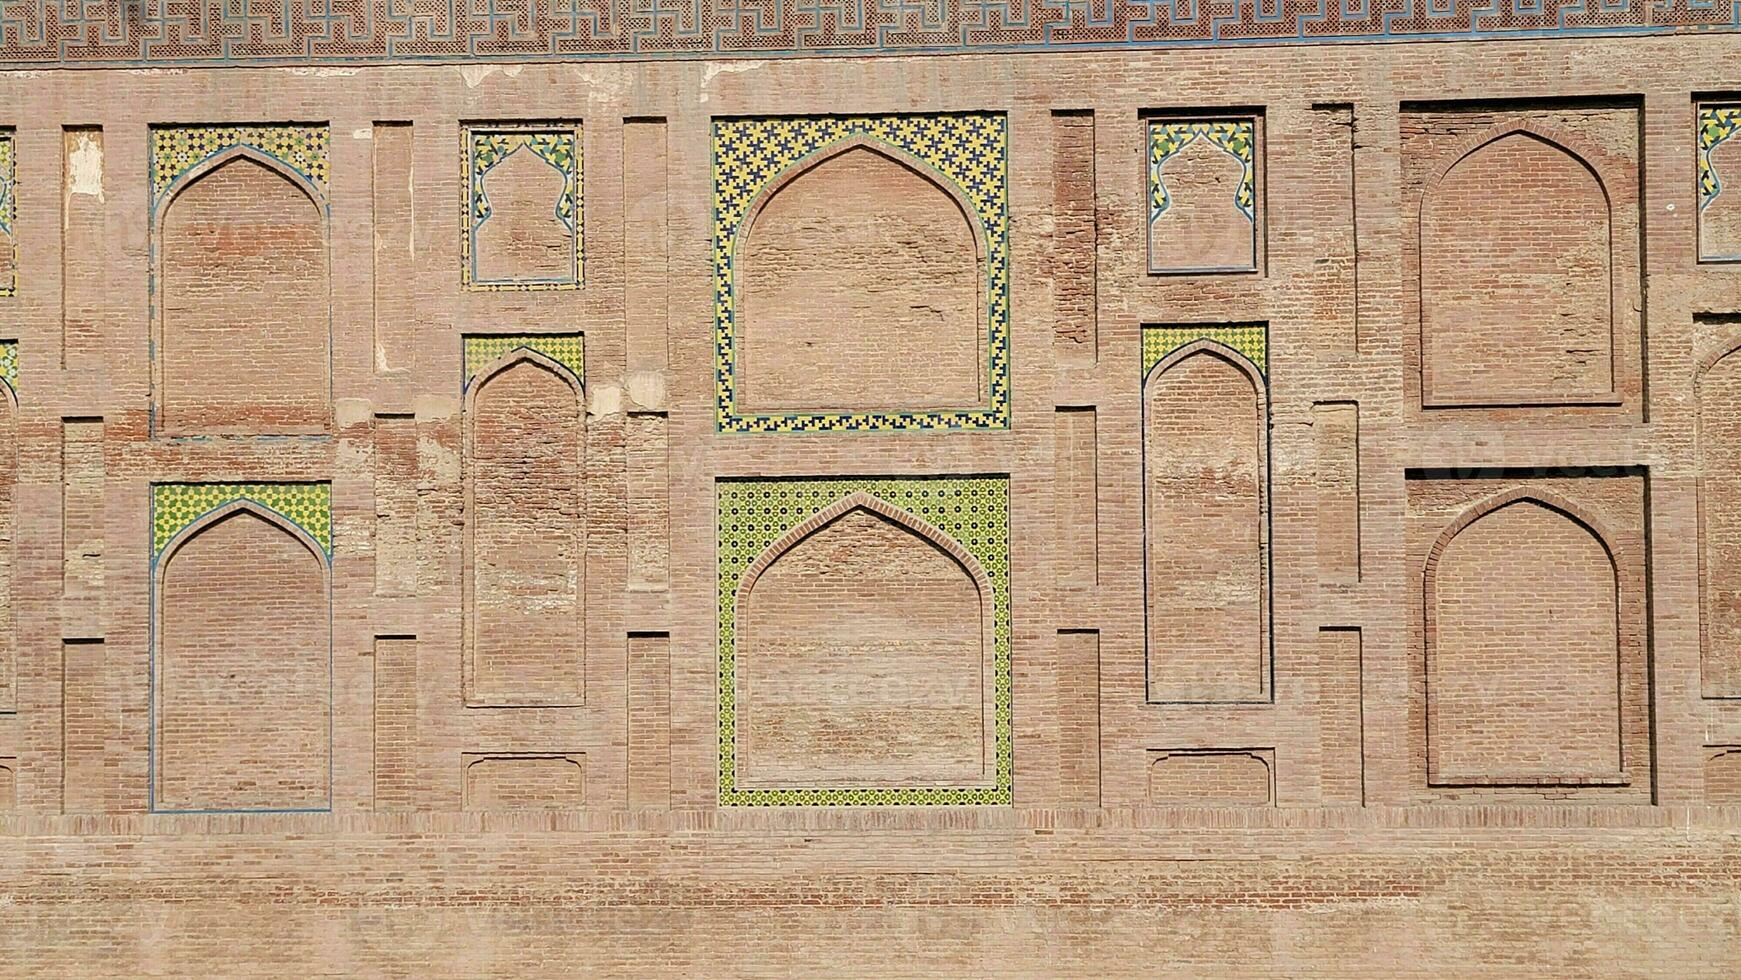 The conserved picture wall in Badshahi fort close picture of wall texture photo